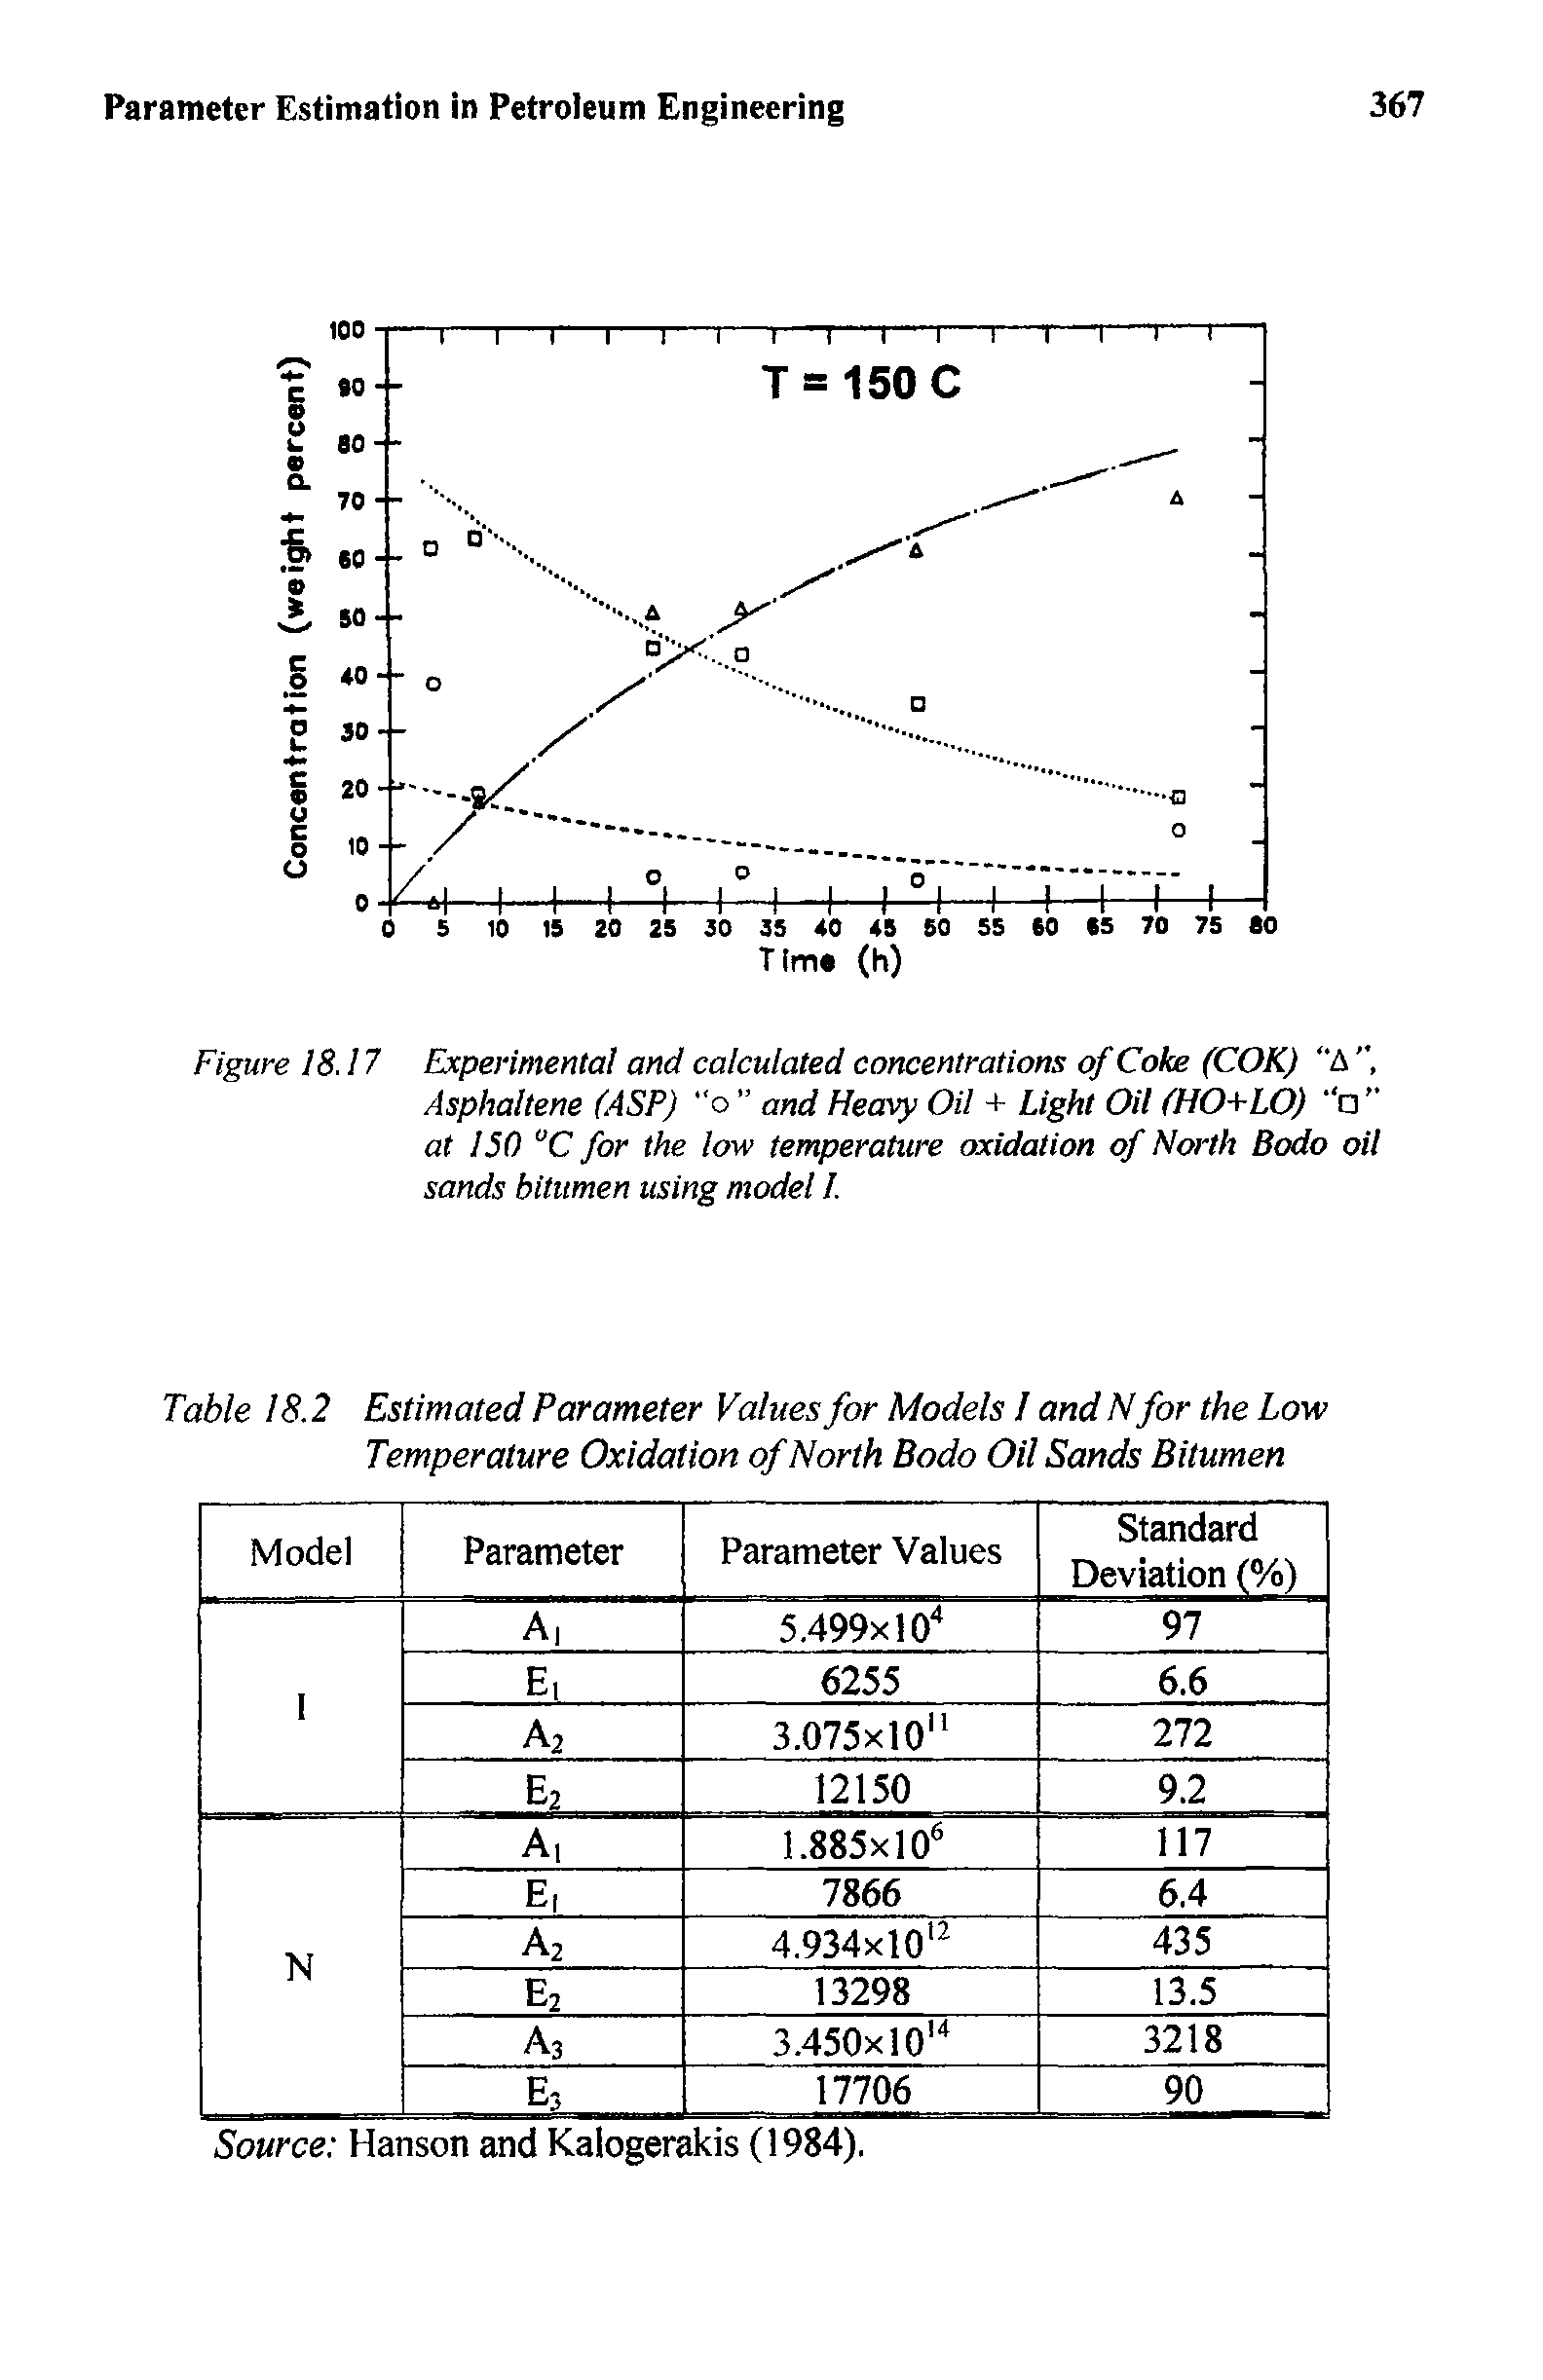 Table 18.2 Estimated Parameter Values for Models I and Nfor the Low Temperature Oxidation of North Bodo Oil Sands Bitumen...